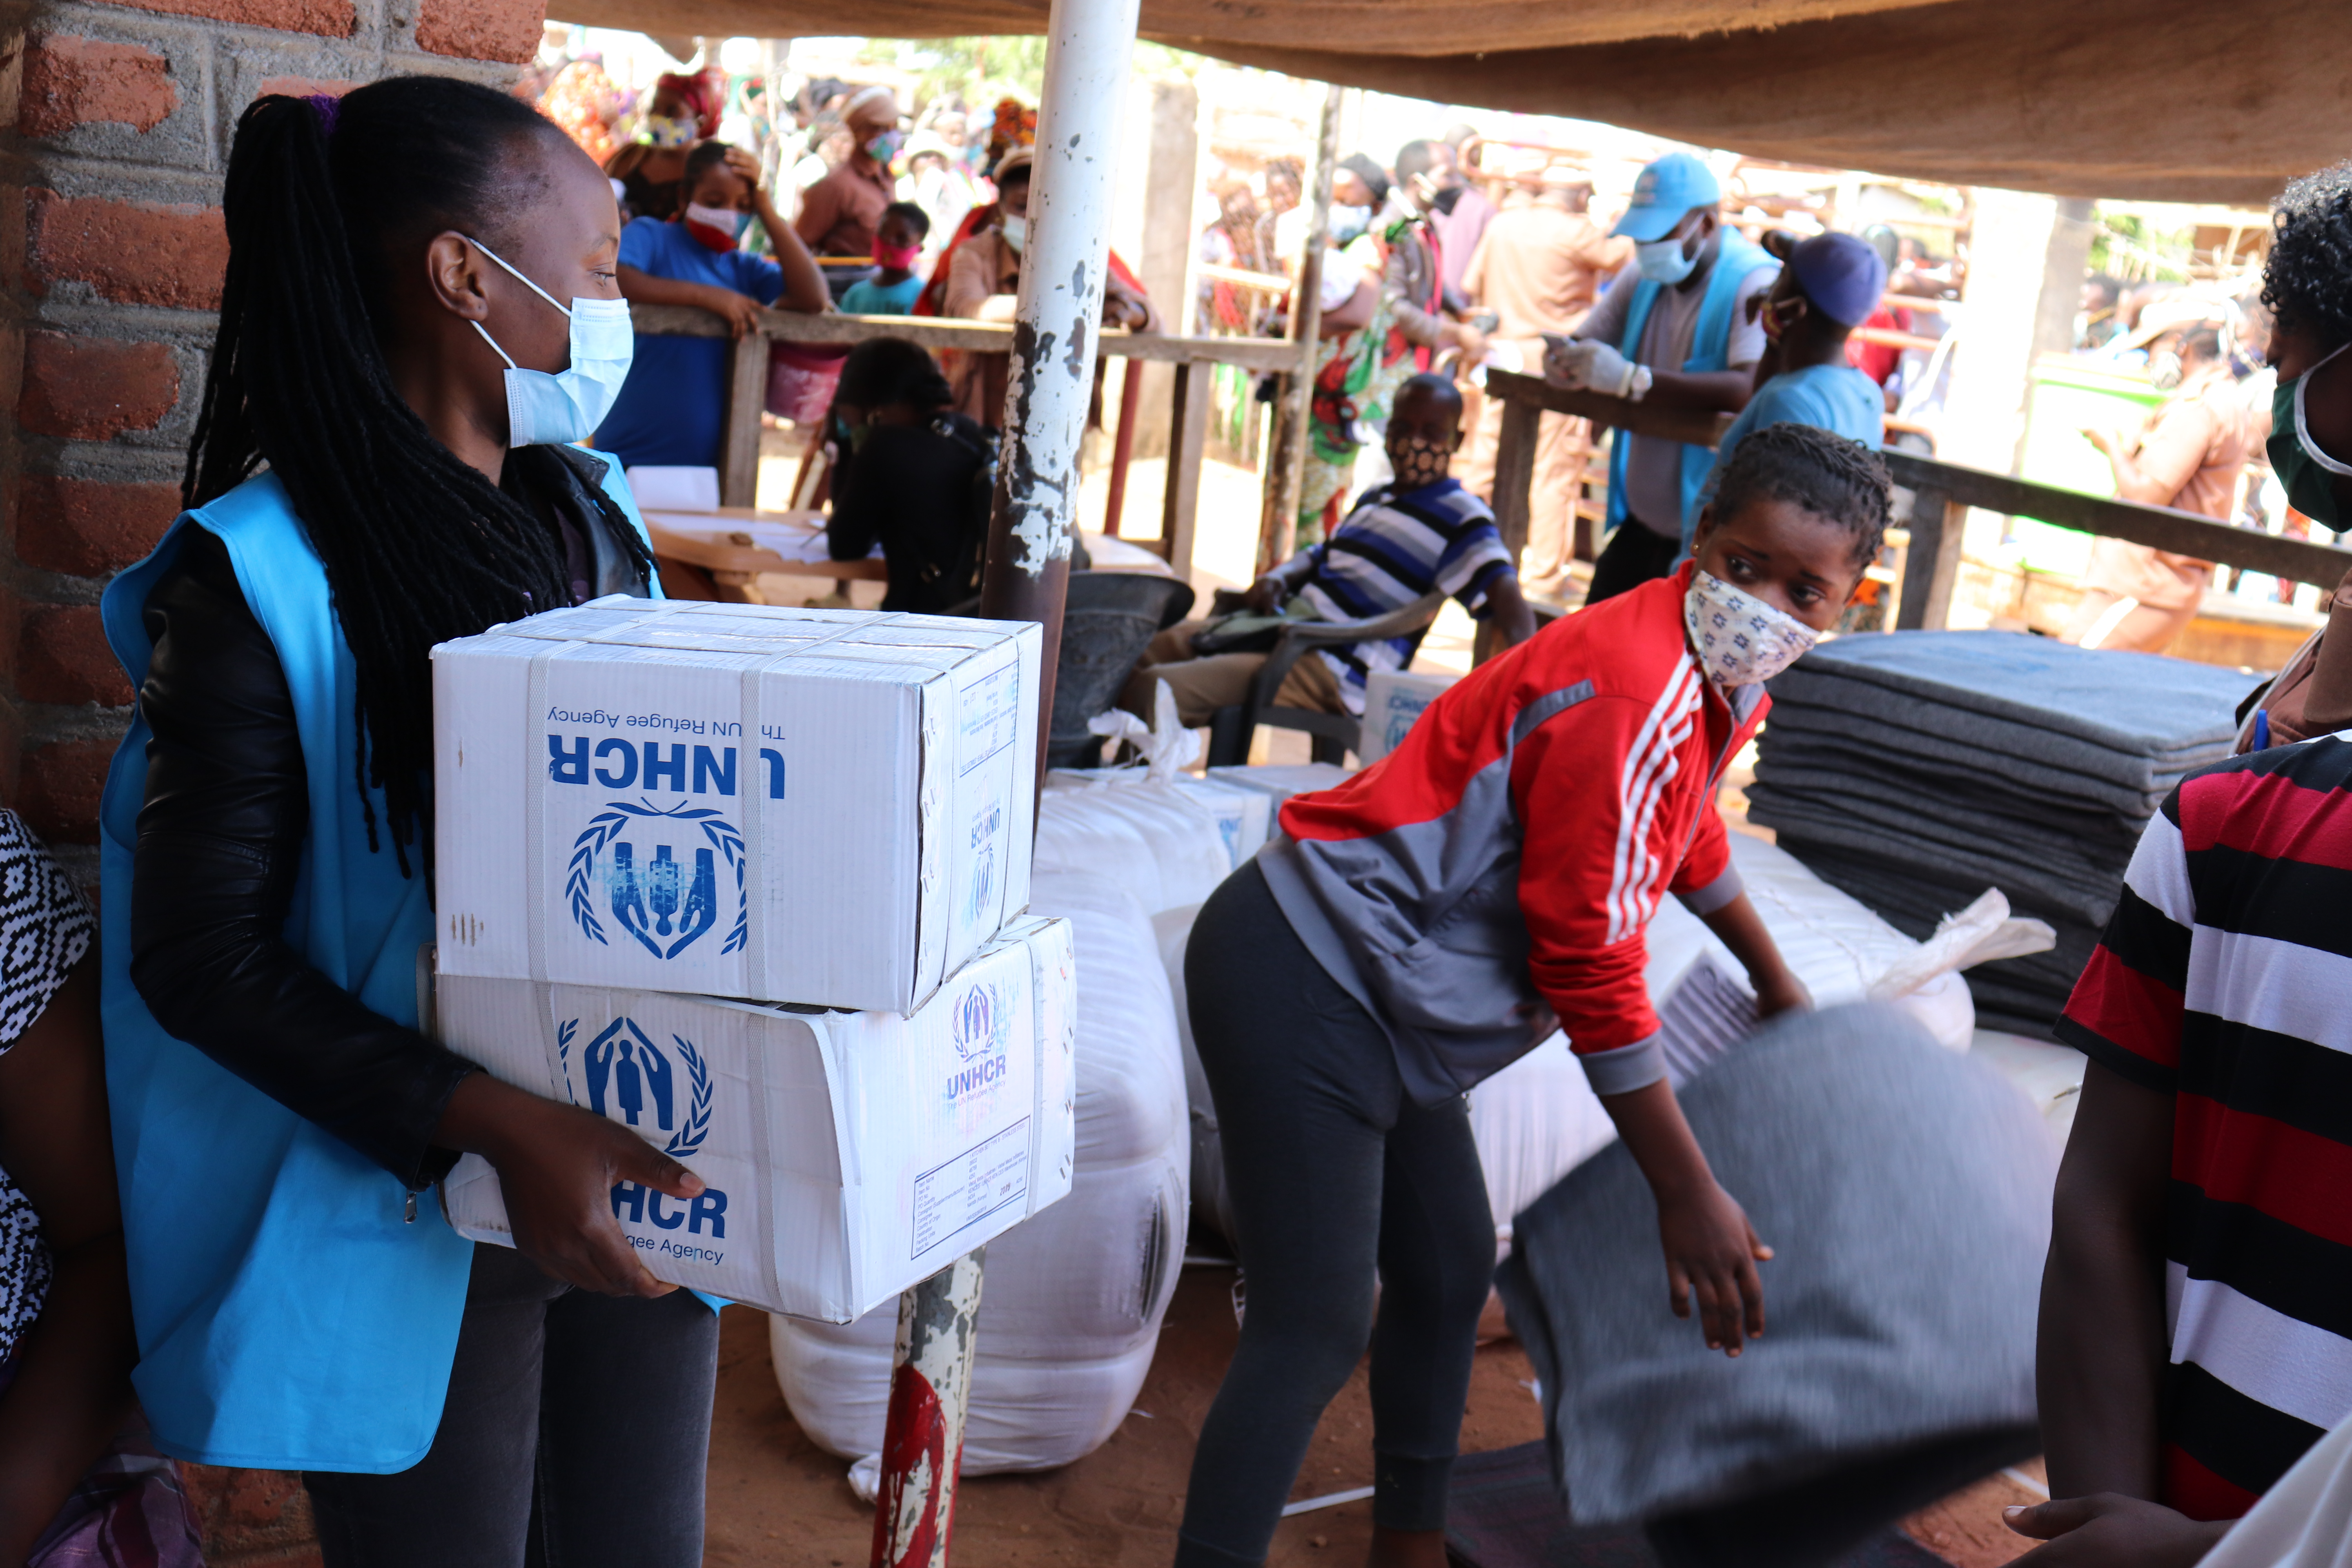 Natalia Inacia Jaime Alifoi (left), UN Volunteer Community Services Assistant with UNHCR in Mozambique, distributes blankets and cooking kits for refugee families, and sanitary napkins and soap for girls and women. (UNV, 2020)